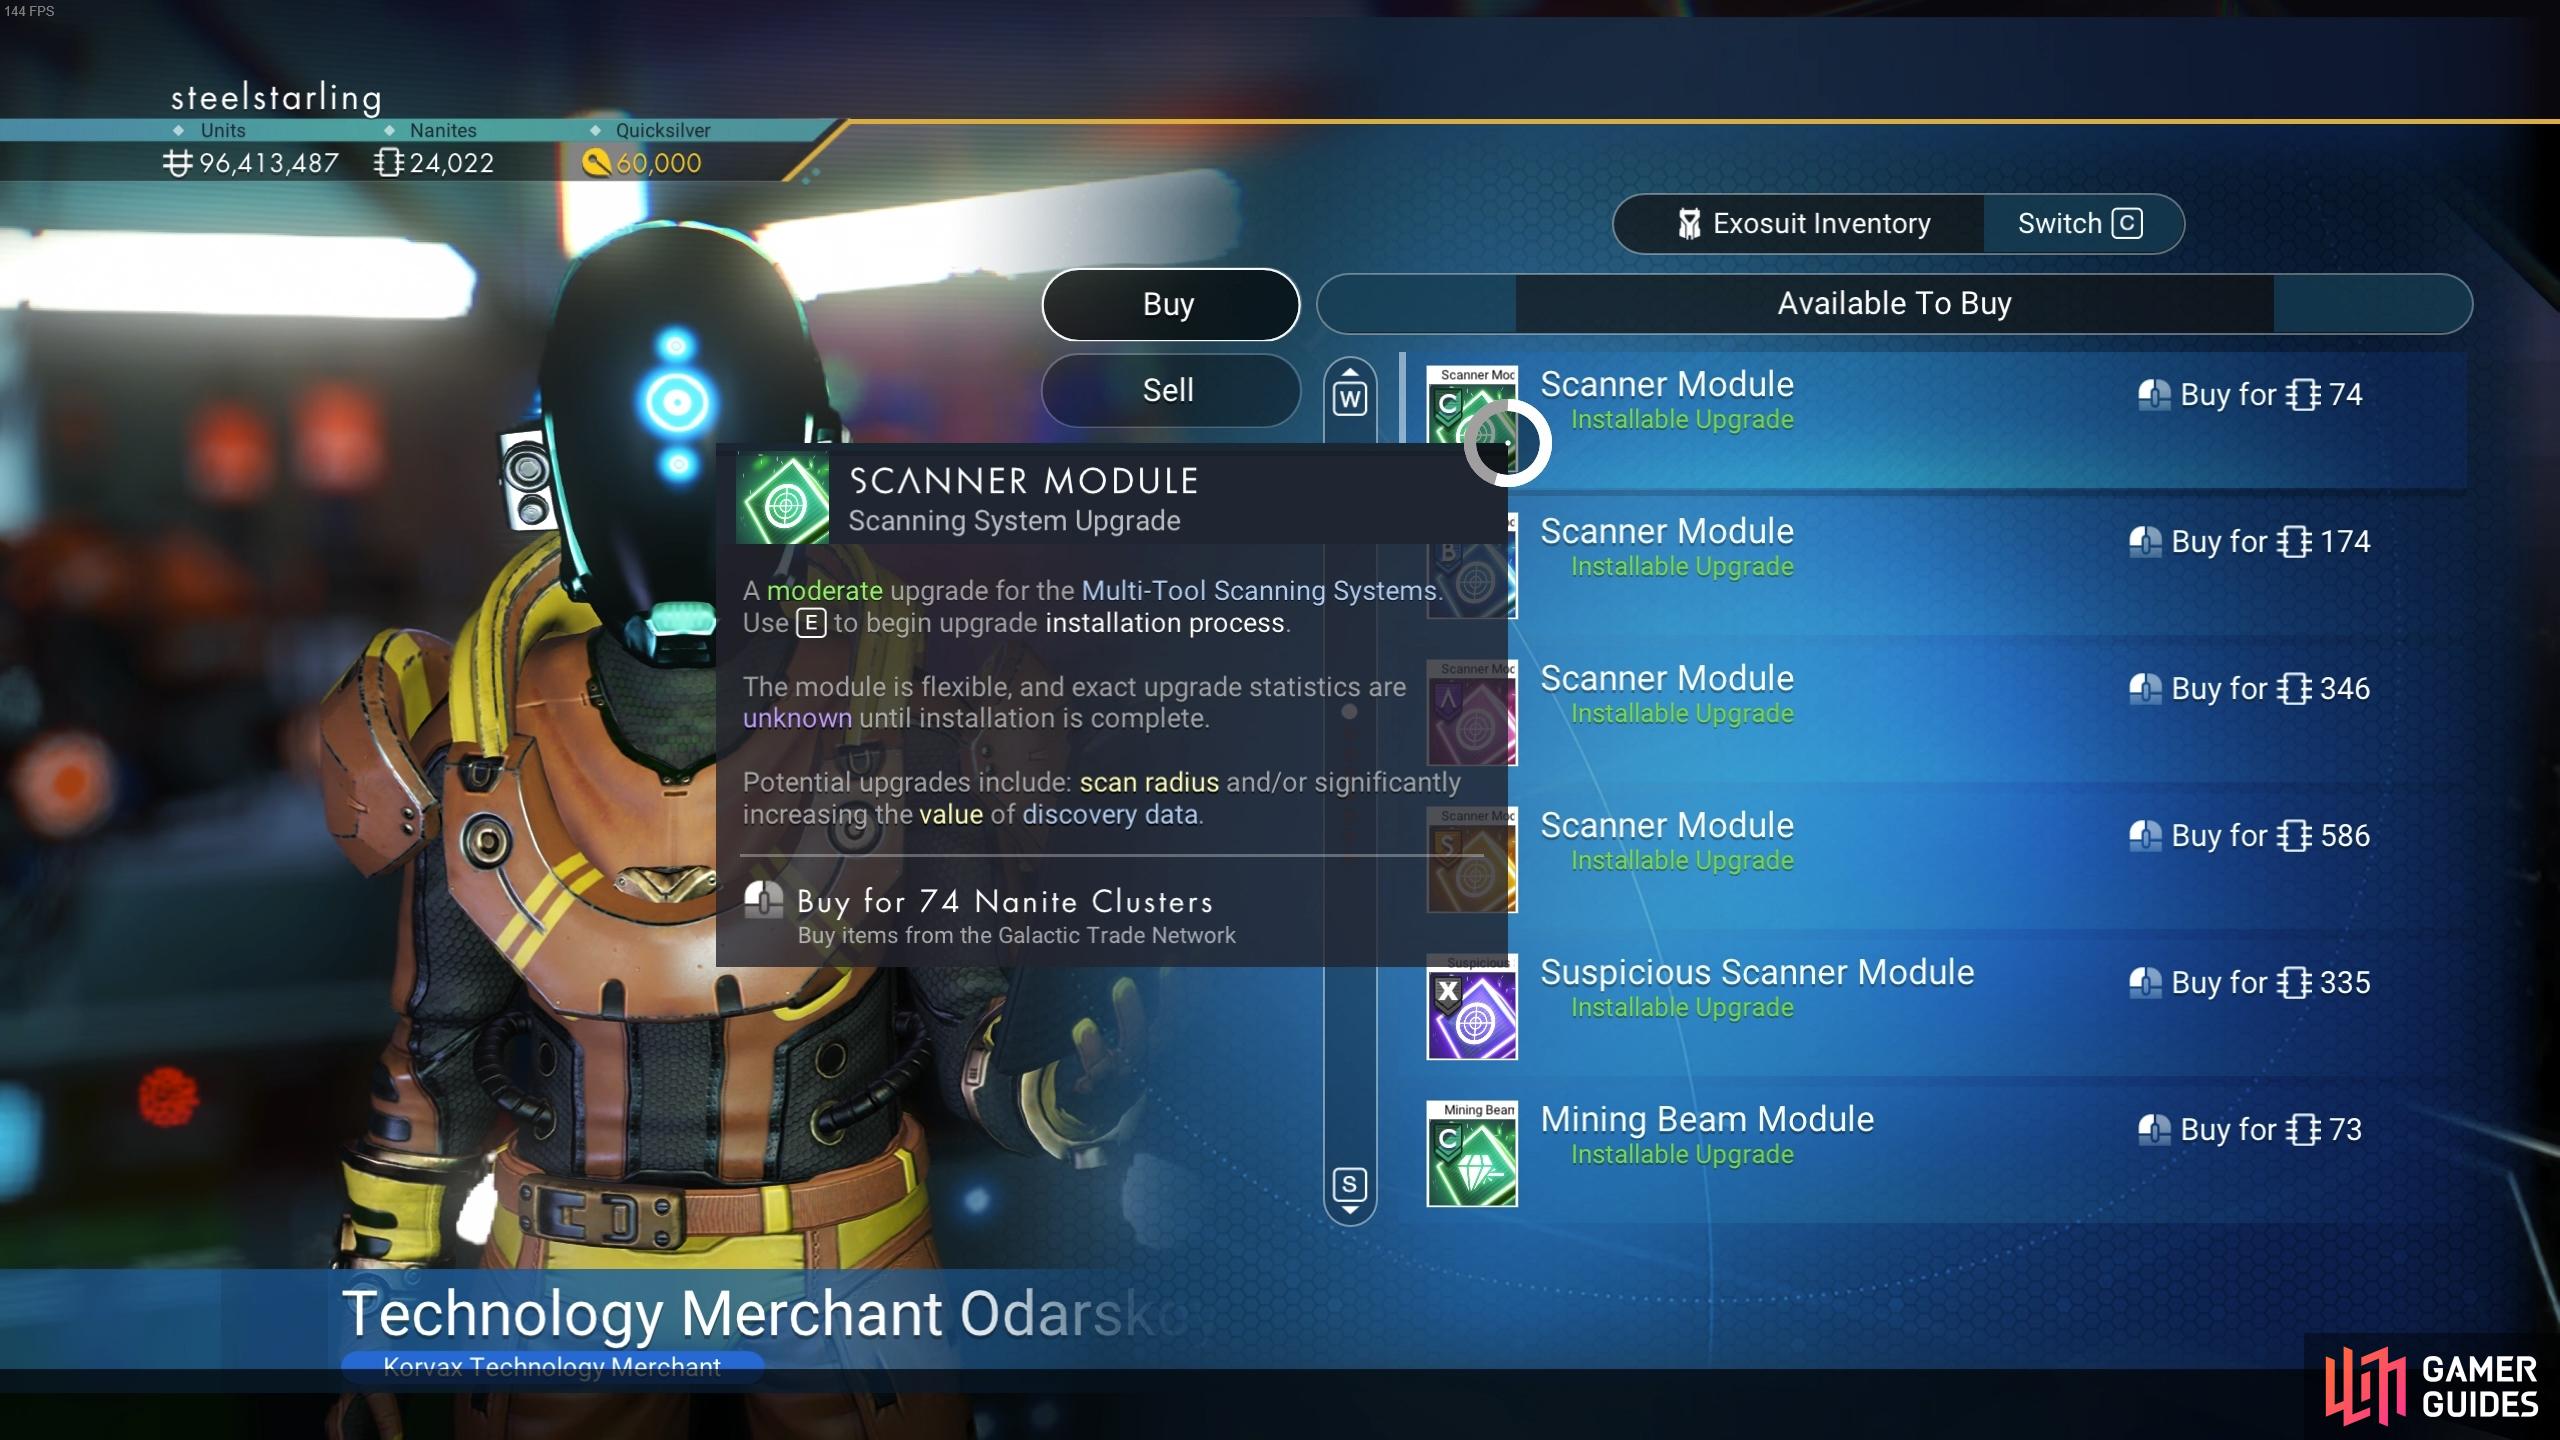 You'll find numerous upgrade modules from Multi-Tool technology merchants on space stations.